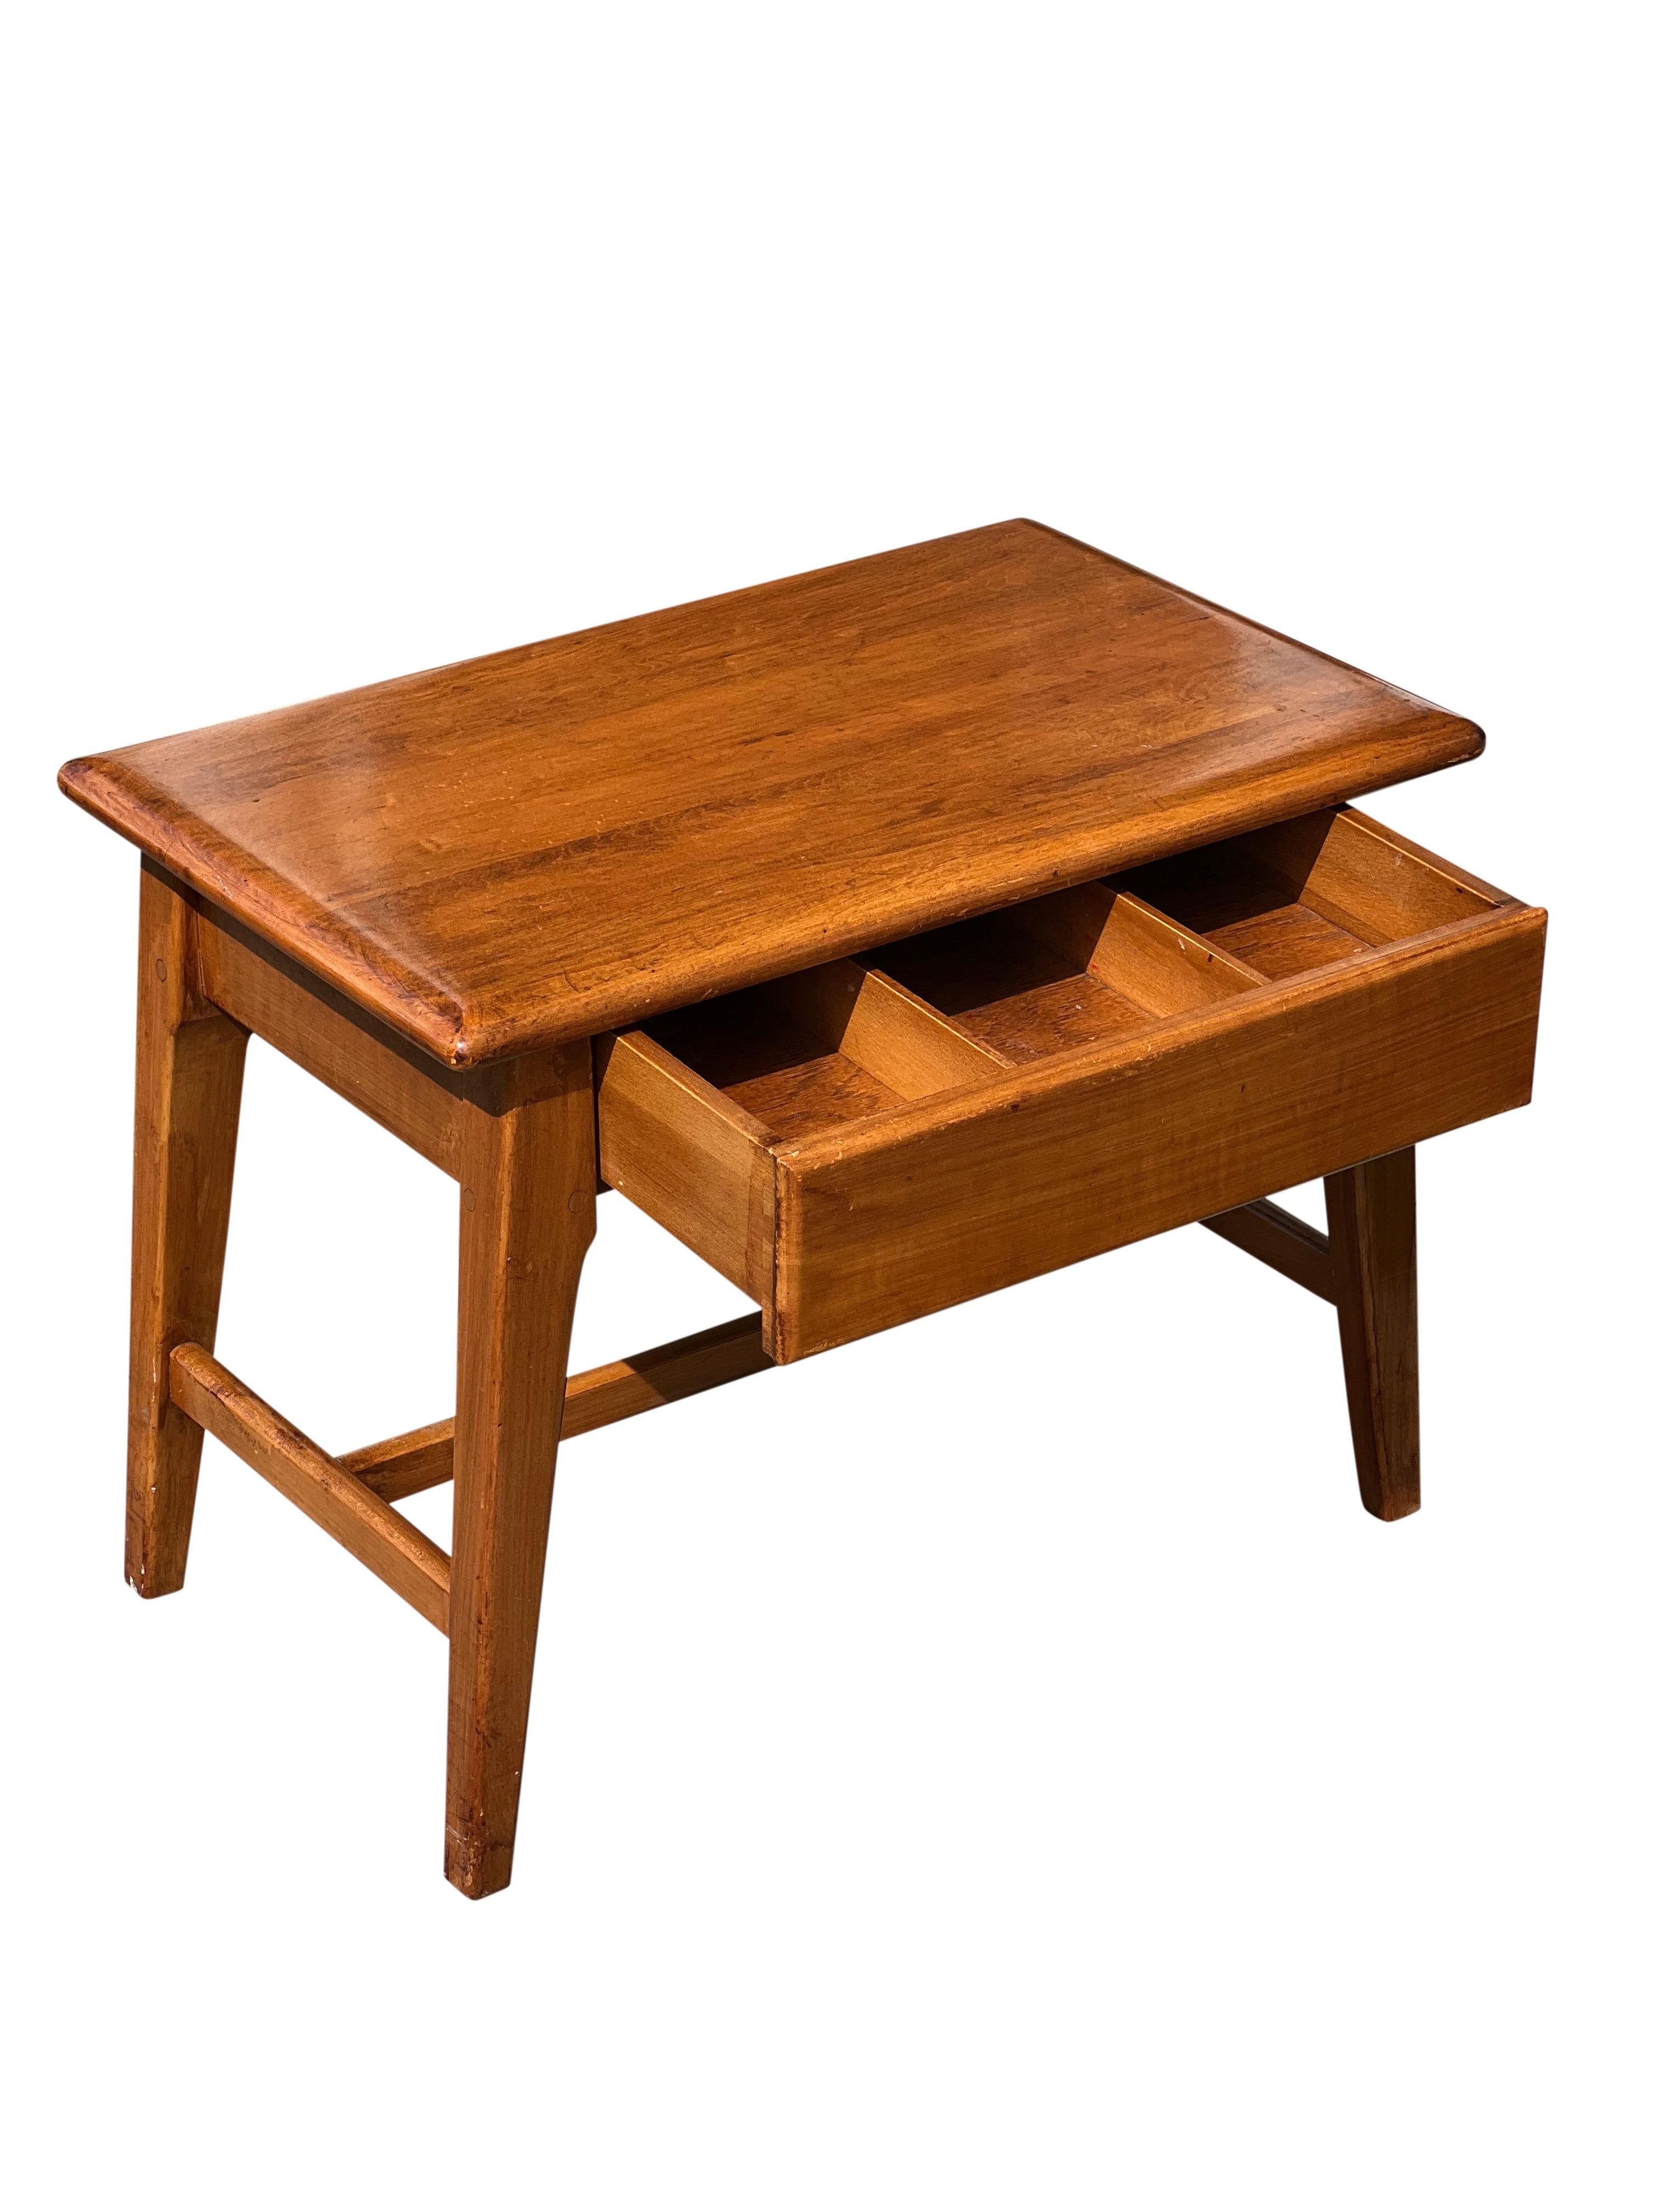 Midcentury Italian oak hardwood sewing table or stool.

Wonderful low side table or stool with a single three-section slotted drawer.  A lengthwise hand groove is carved underneath for easy open/close.  A smooth, rounded waterfall edge and splayed